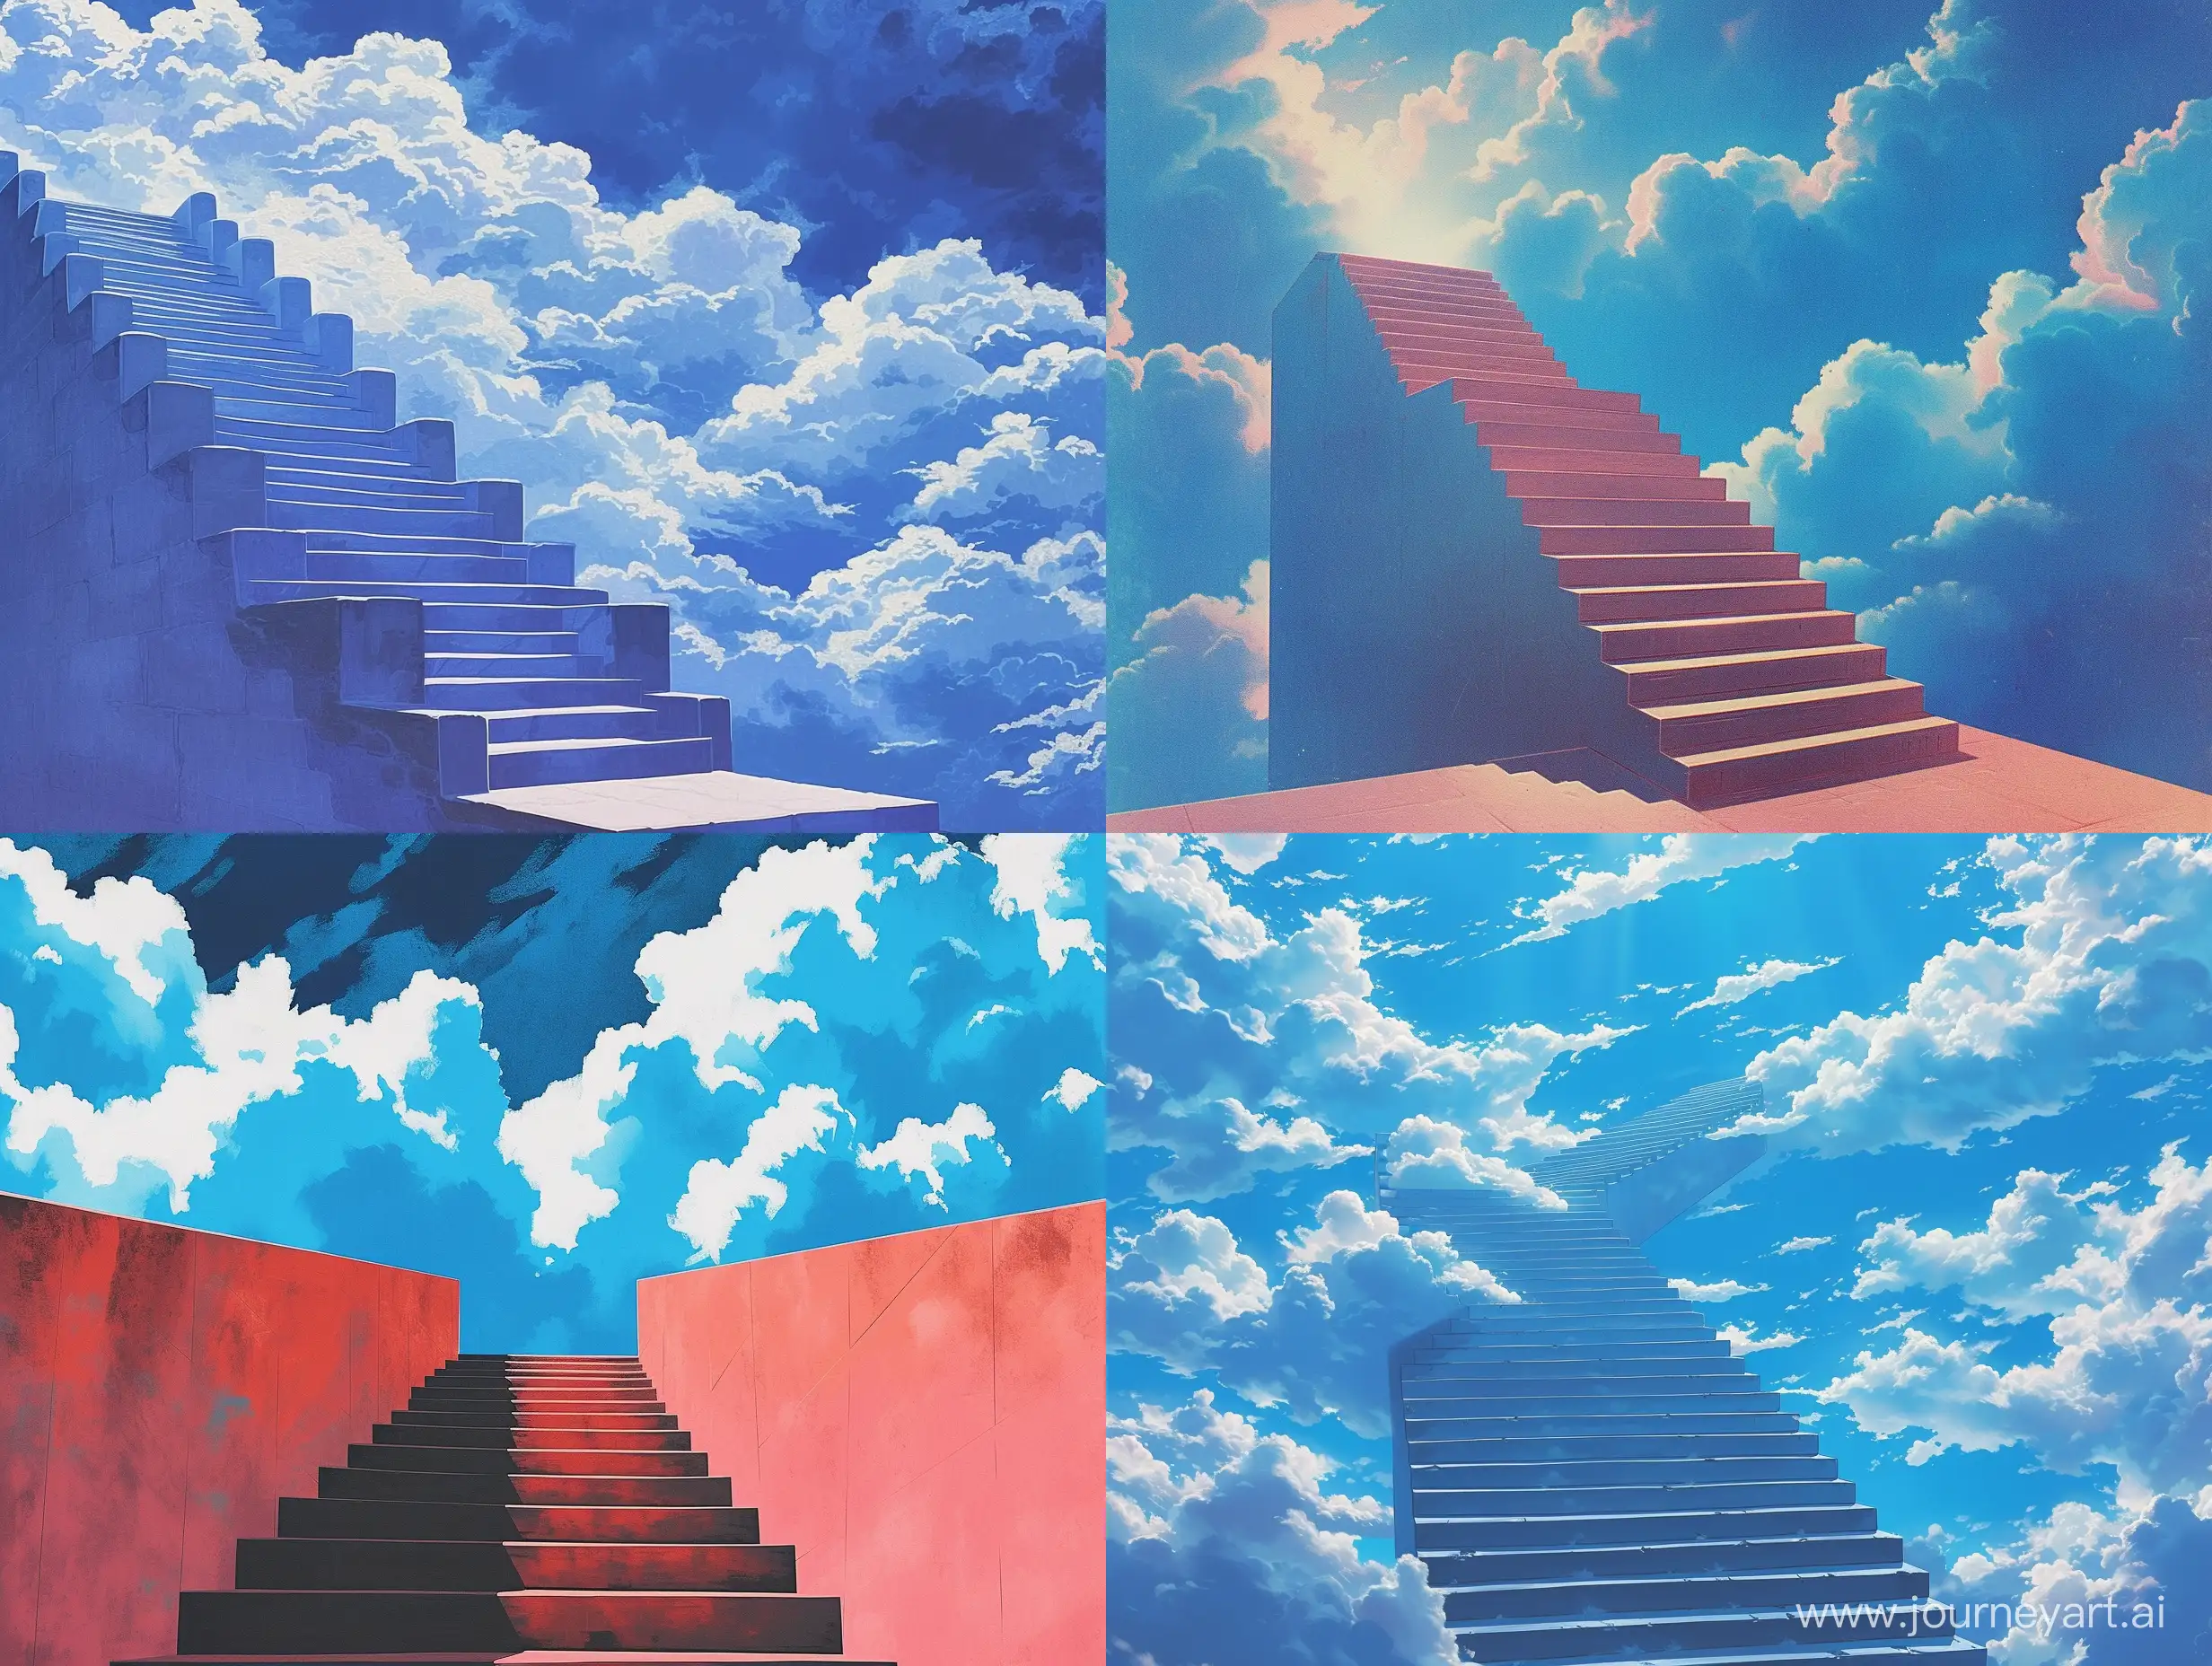 Retro-Stairway-to-the-Clouds-Syd-Meads-Nostalgic-Synthwave-Art